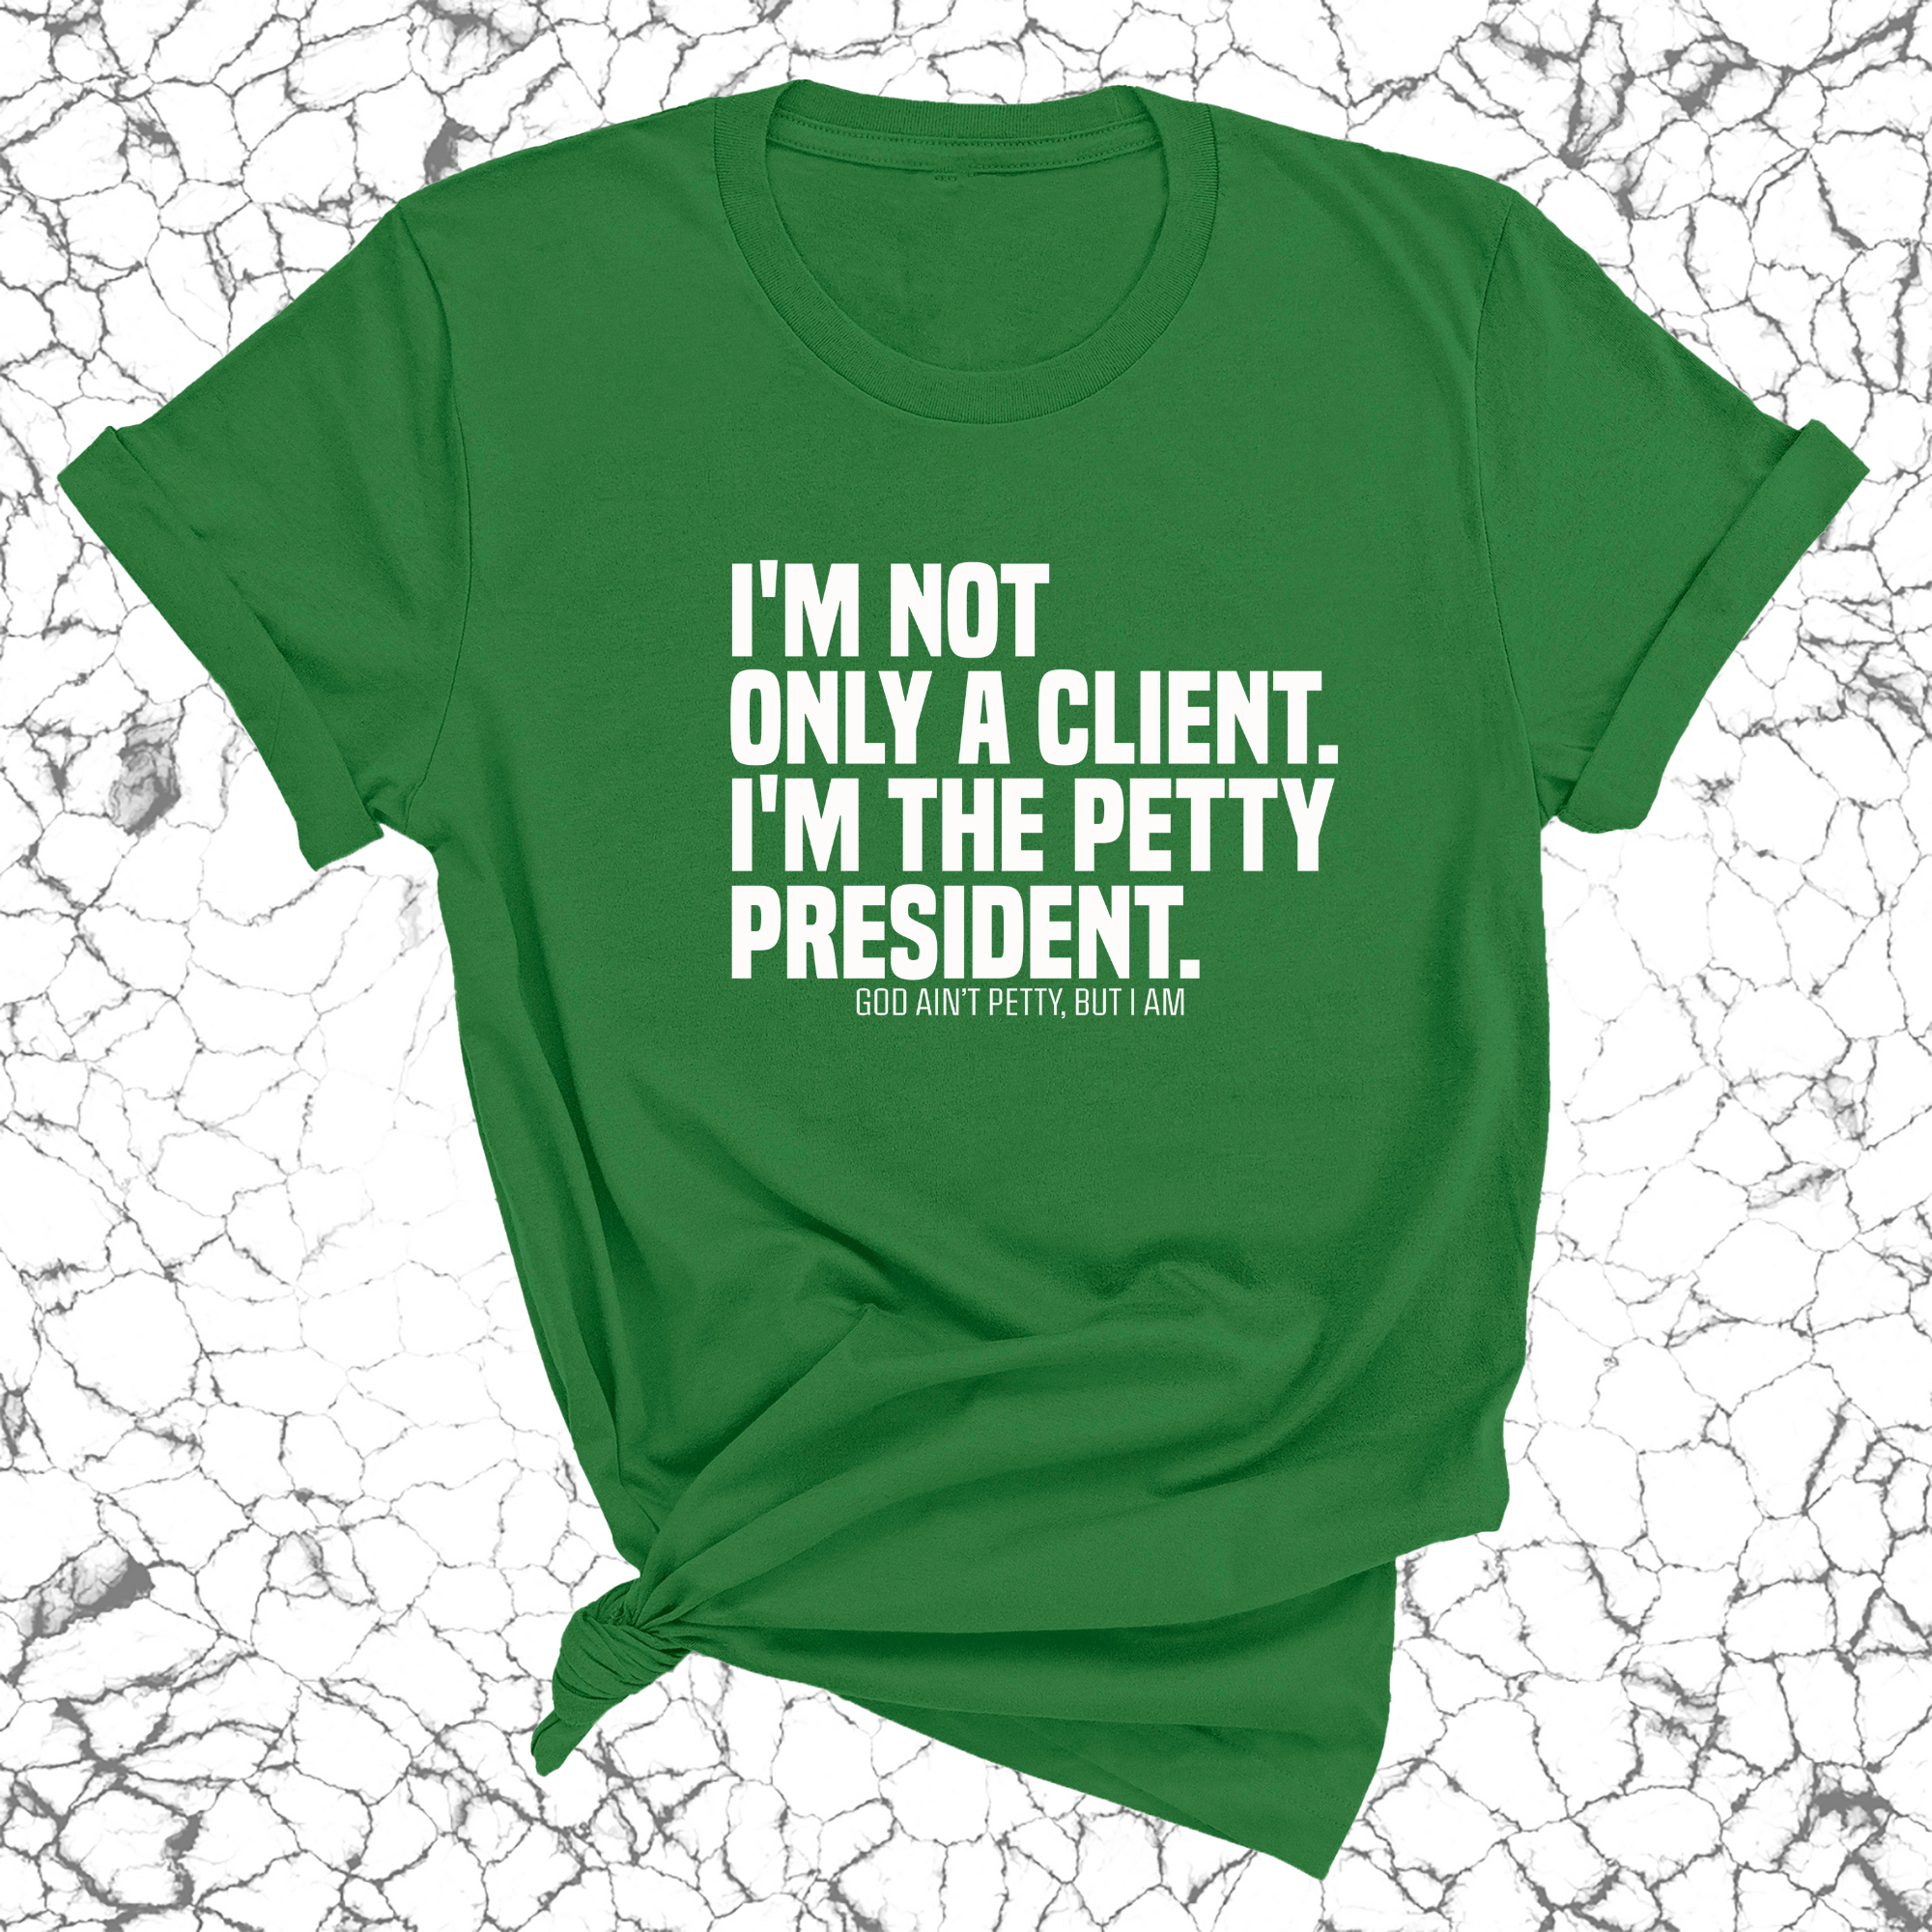 I'm not only a Client. I'm the Petty President Unisex Tee-T-Shirt-The Original God Ain't Petty But I Am